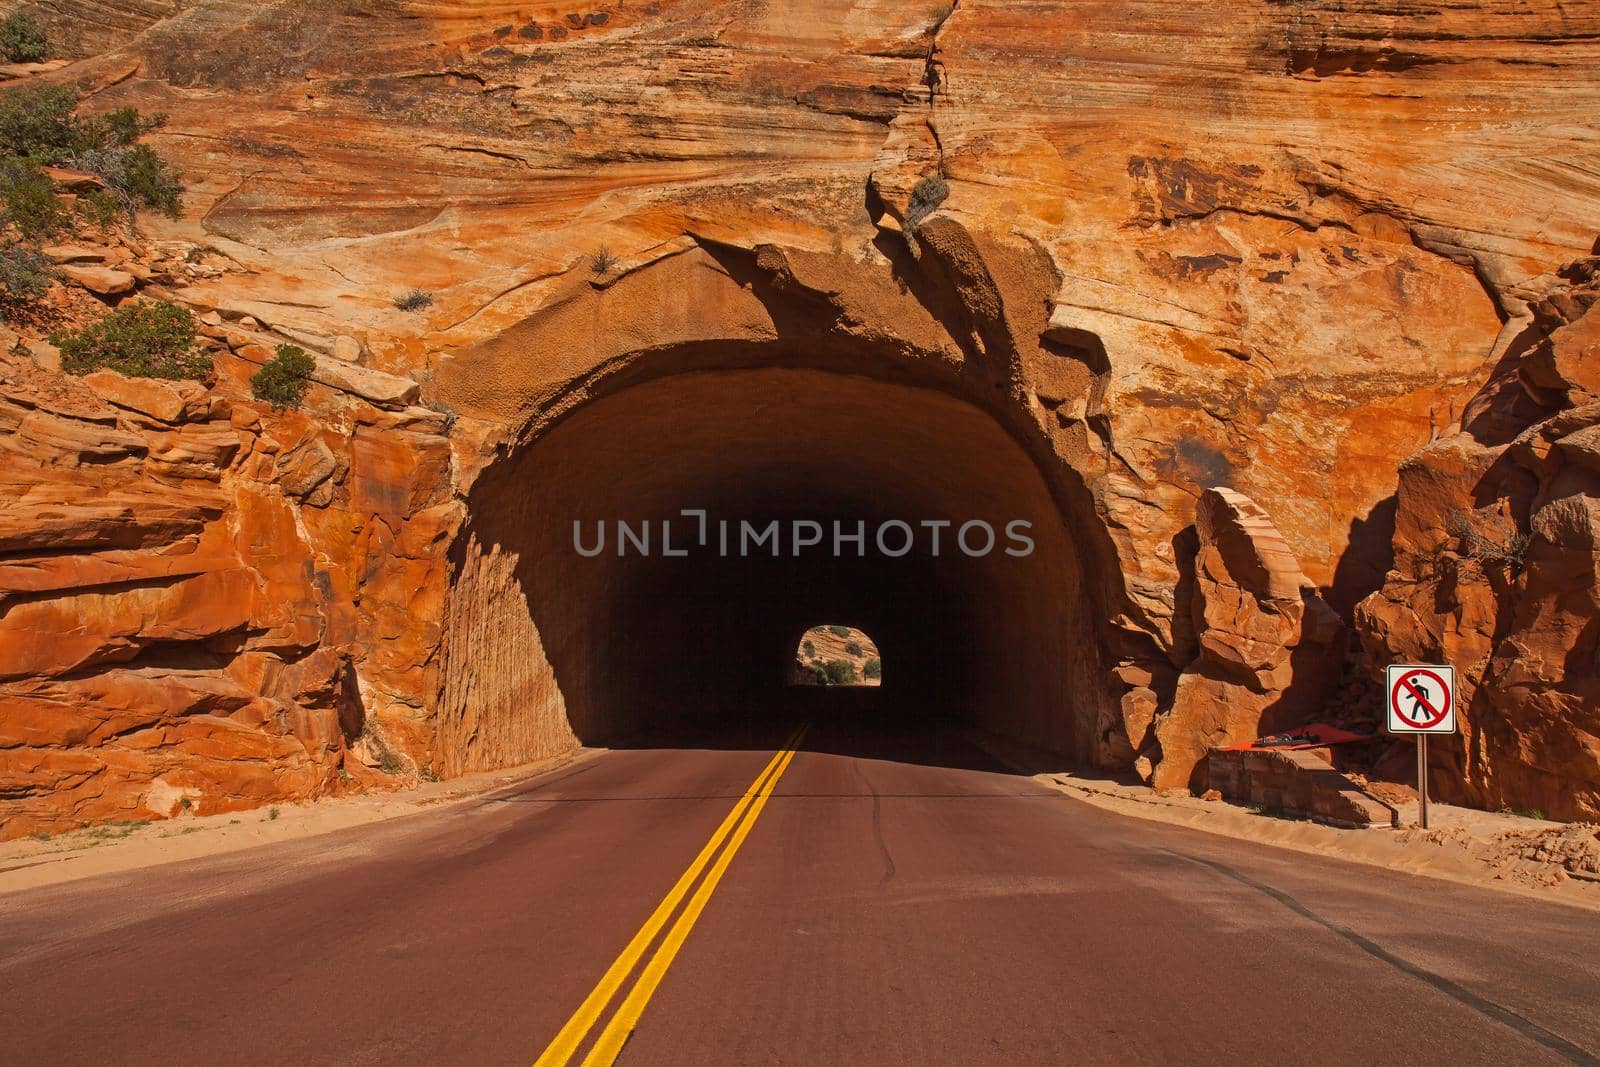 One of the tunnels on the Zion Park Boulevard in Zion National Park near Springdale Utah.